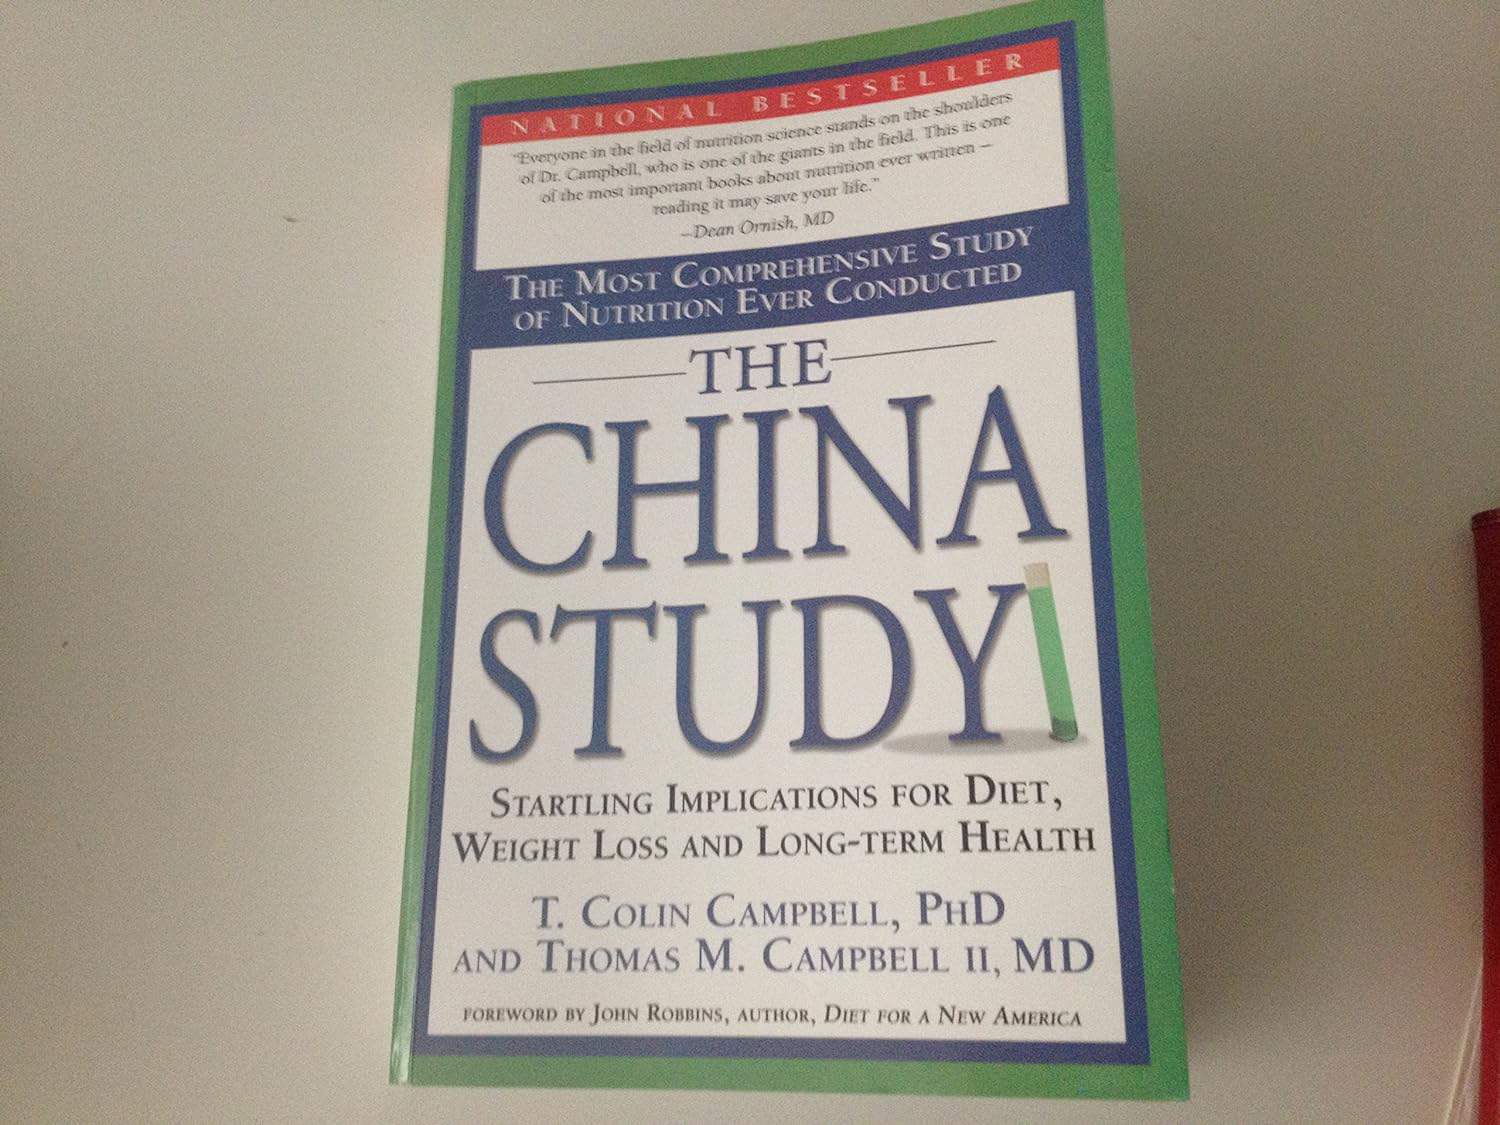 The China Study A Comprehensive Nutrition Study with Significant Implications for Diet, Weight Loss, and Long-Term Health